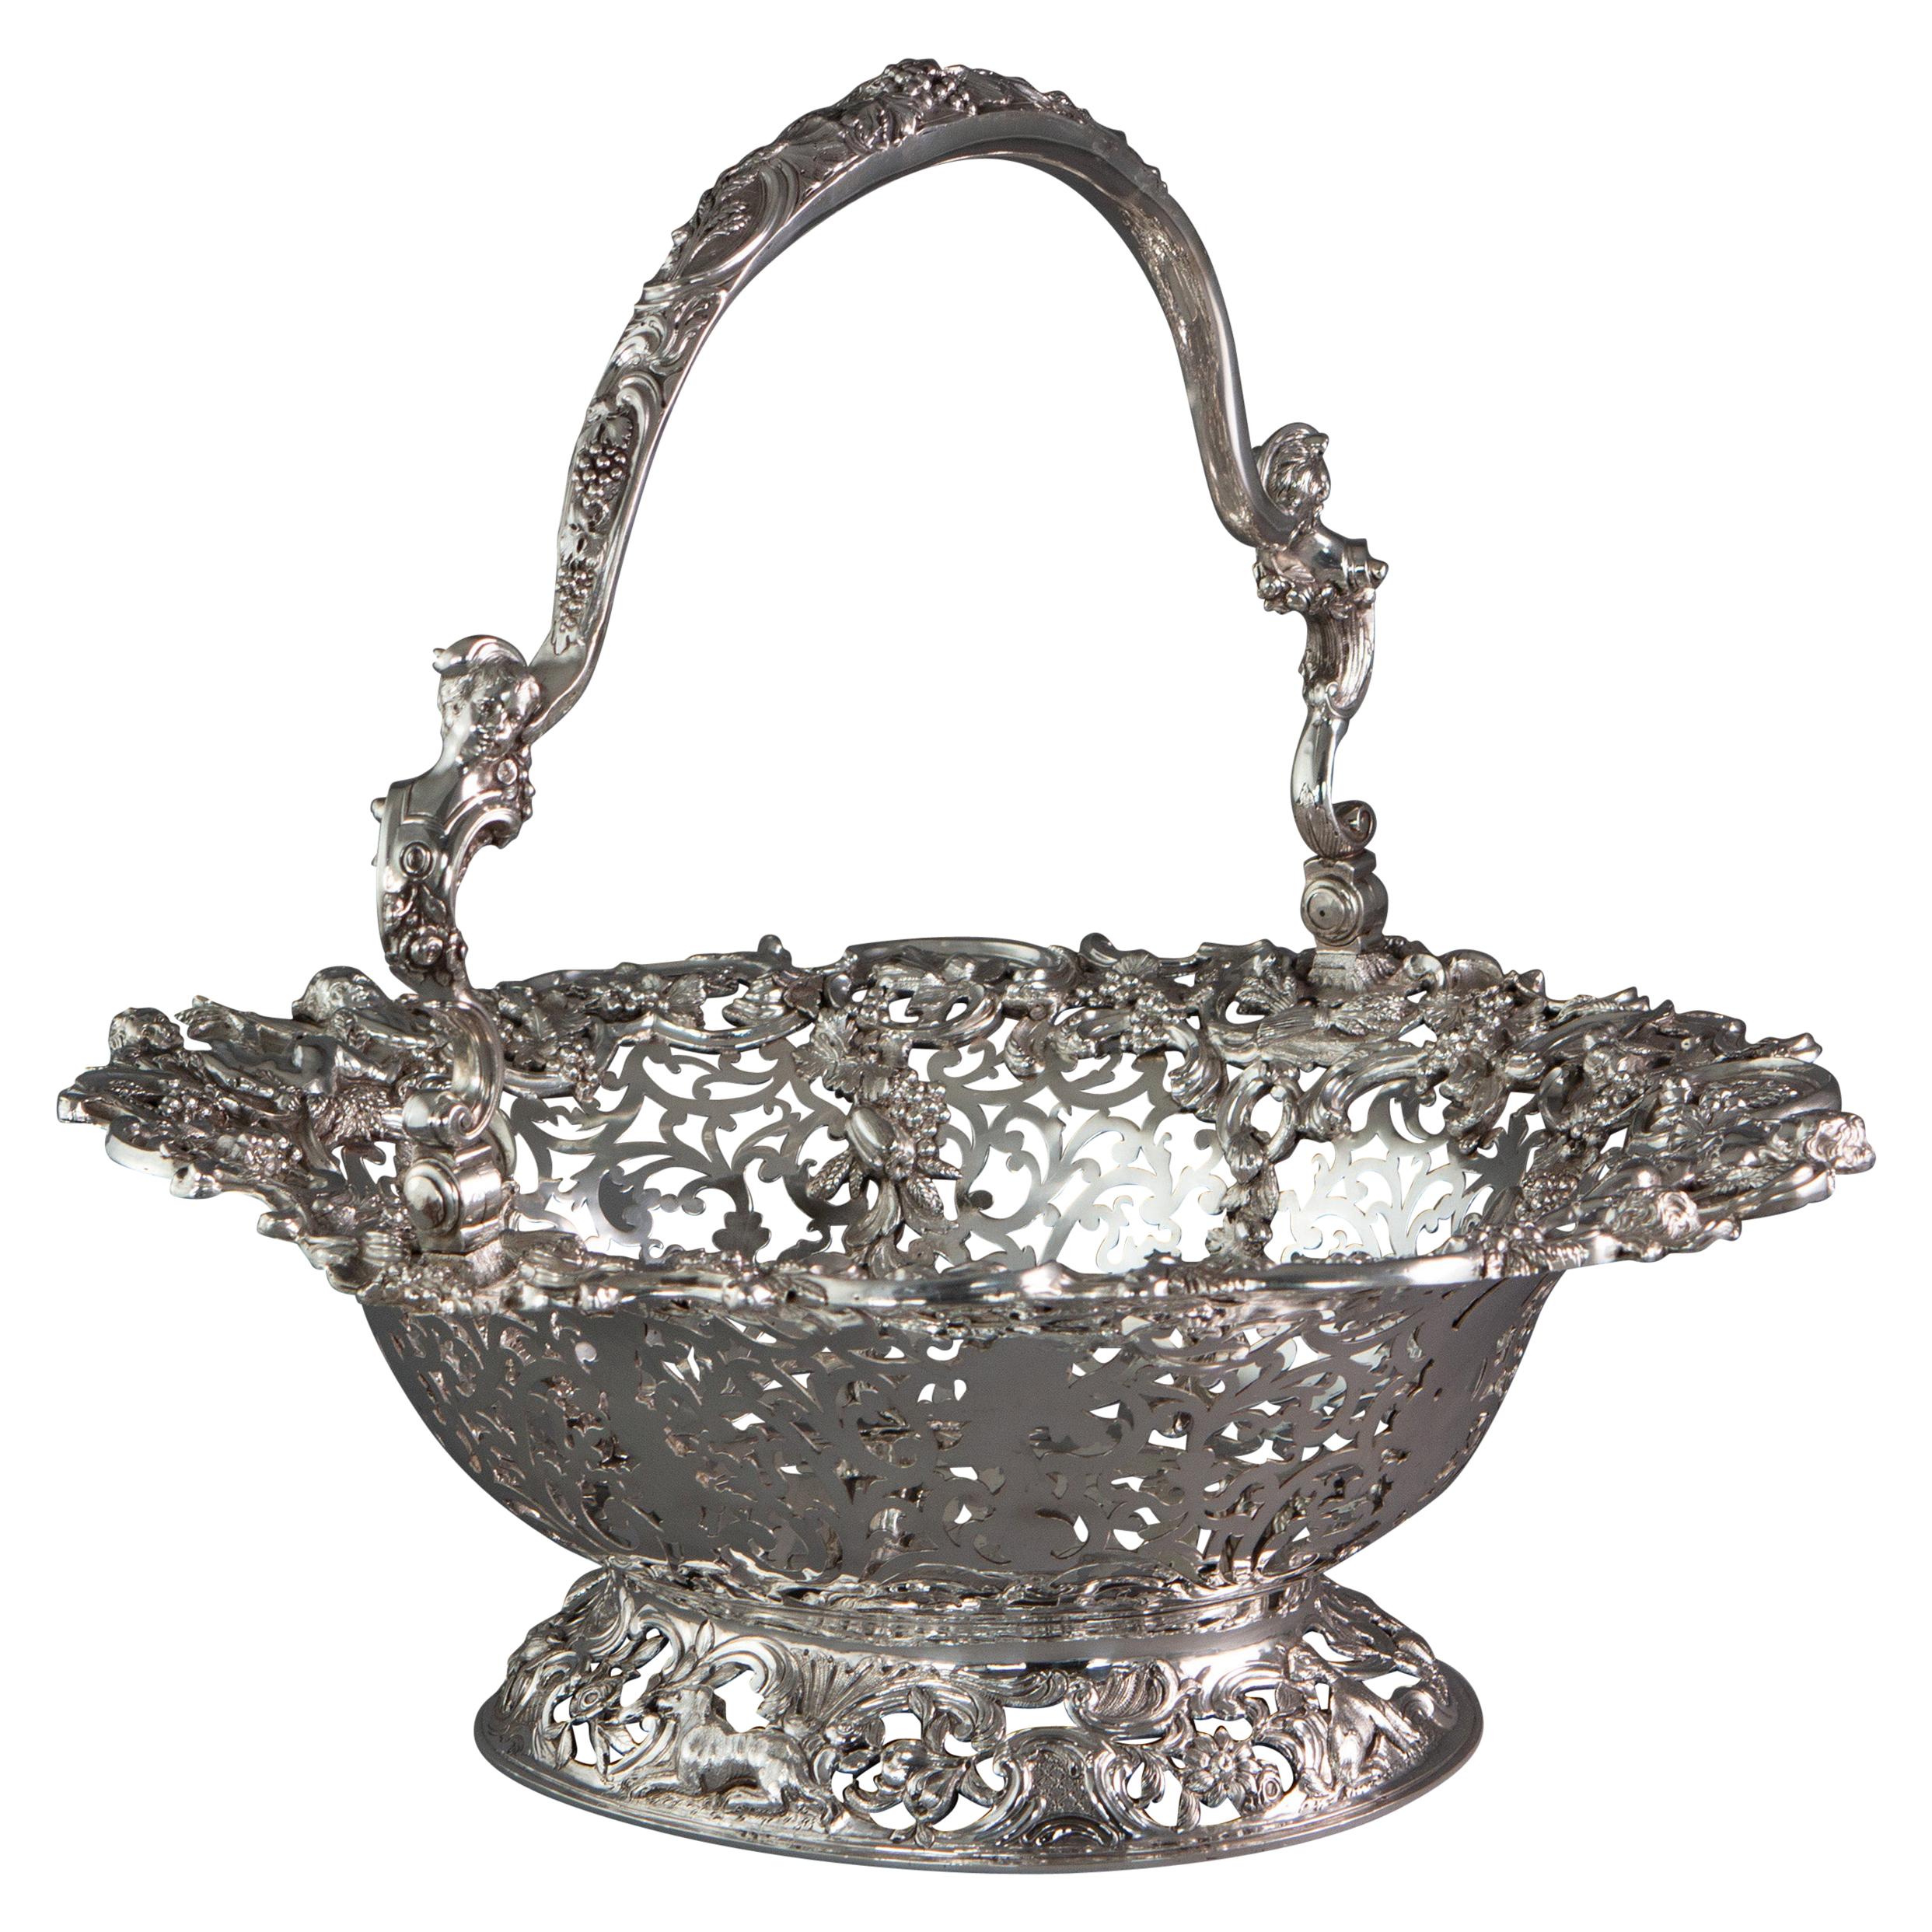 Royal Interest, a George II Silver Harvest Basket London 1759, by William Tuite For Sale